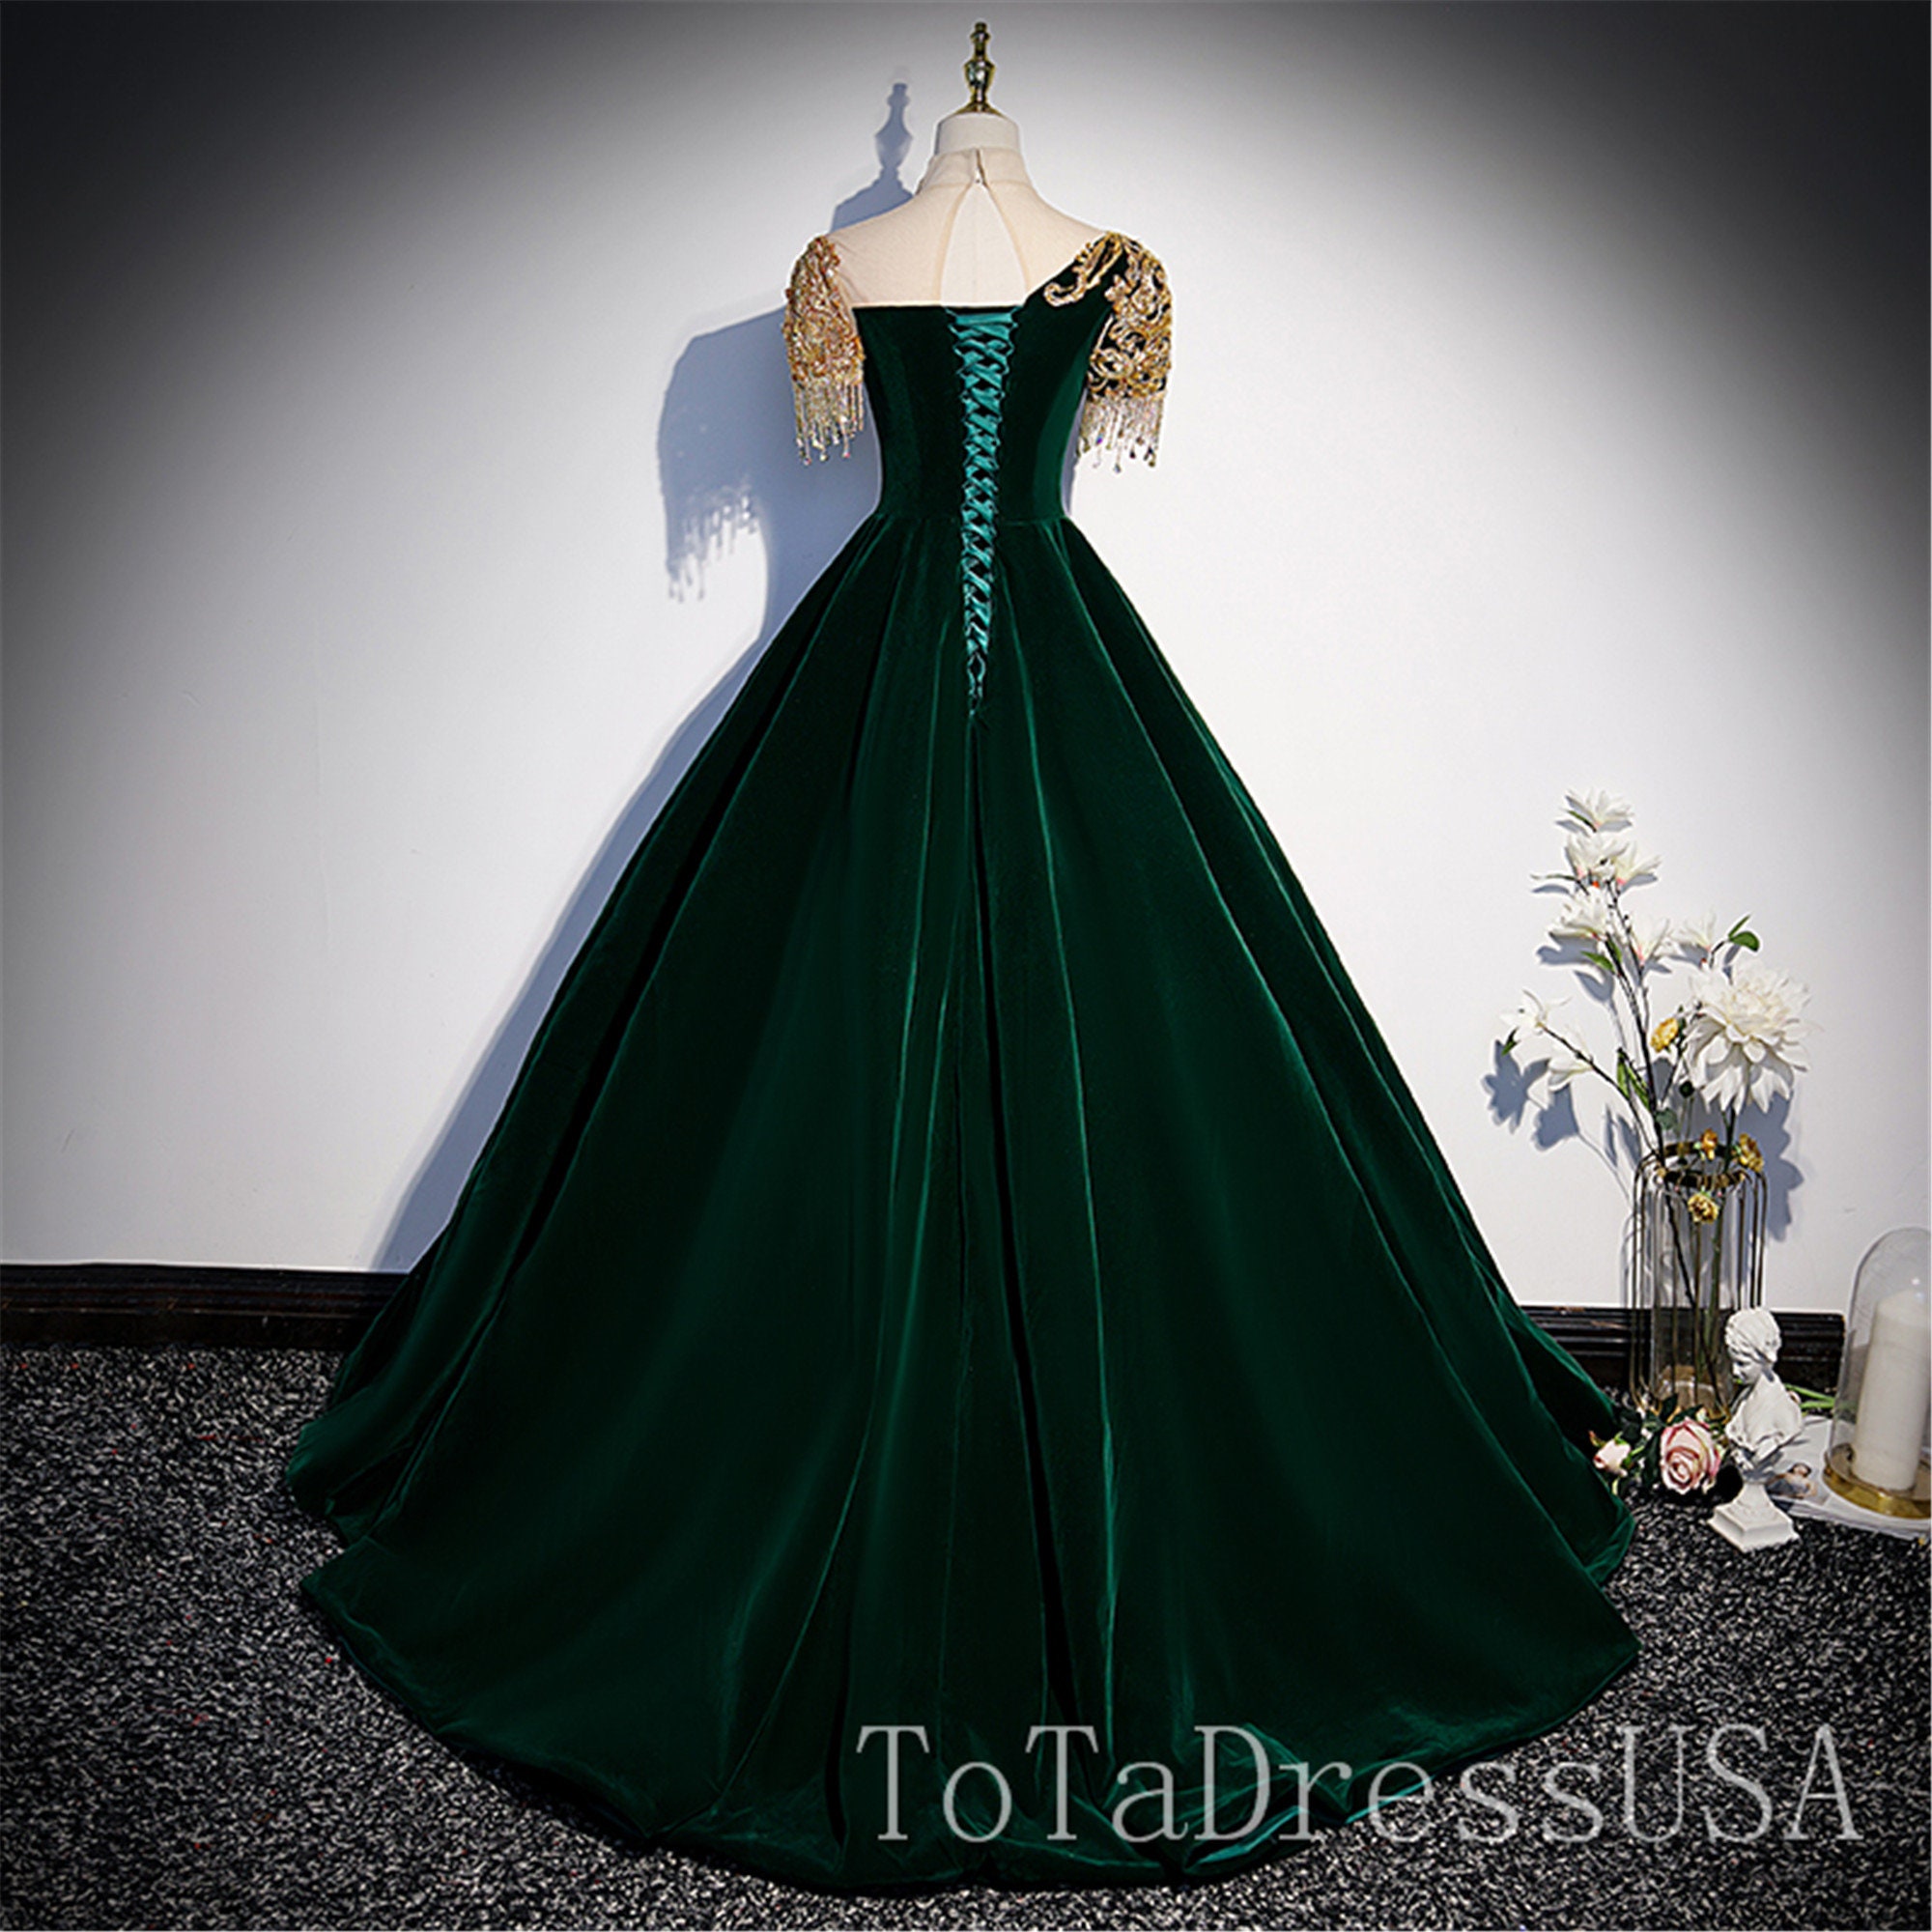 Elegant Dark Green Quinceanera Dresses Lace Applique Beading Ball Gown Prom  Dresses Long Sleeves Court Train Pageant Gowns Evening Wear From  Elegantdress009, $132.97 | DHgate.Com